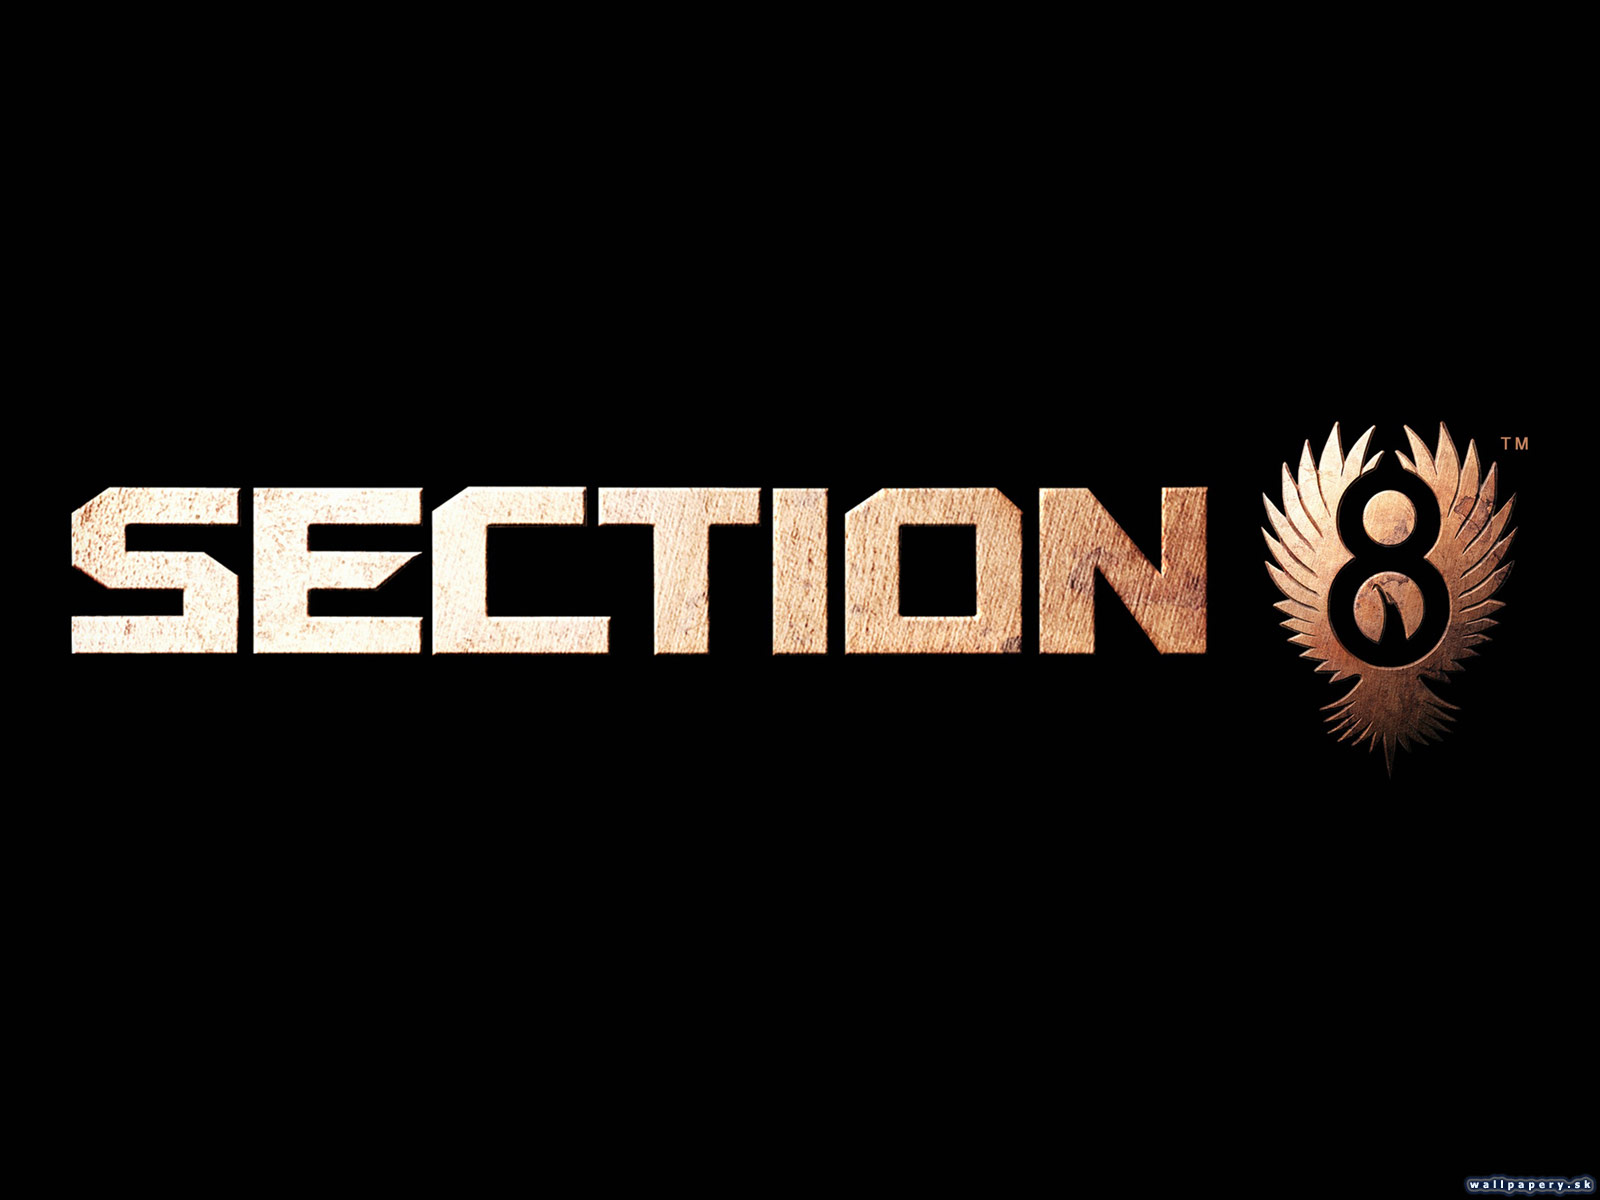 Section 8 - wallpaper 2